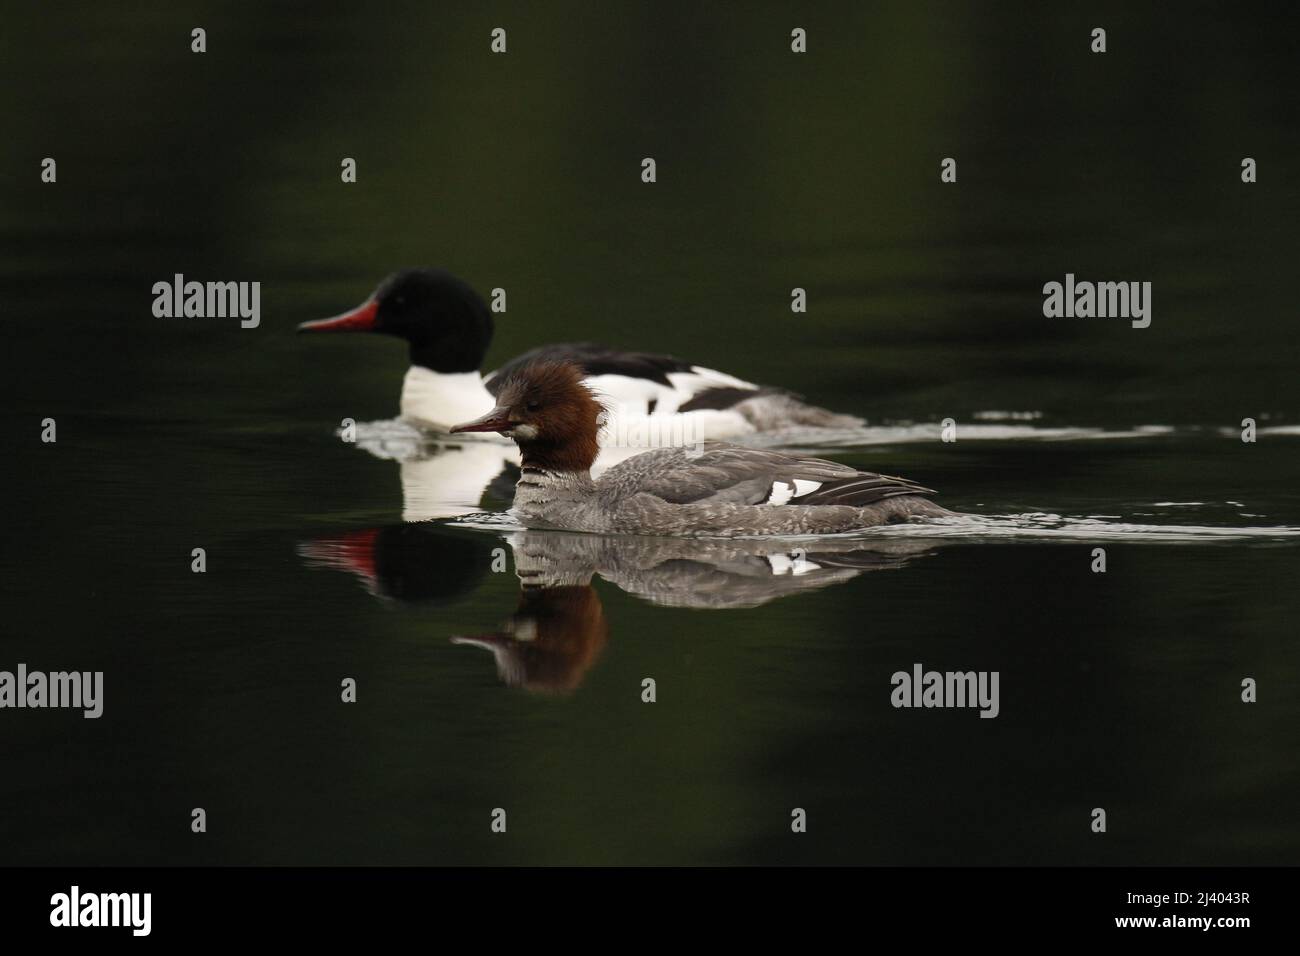 Close up side view of male and female Common Mergansers (Mergus merganser) or Gooseanders swimming in water with a dark background. Victoria, Canada. Stock Photo